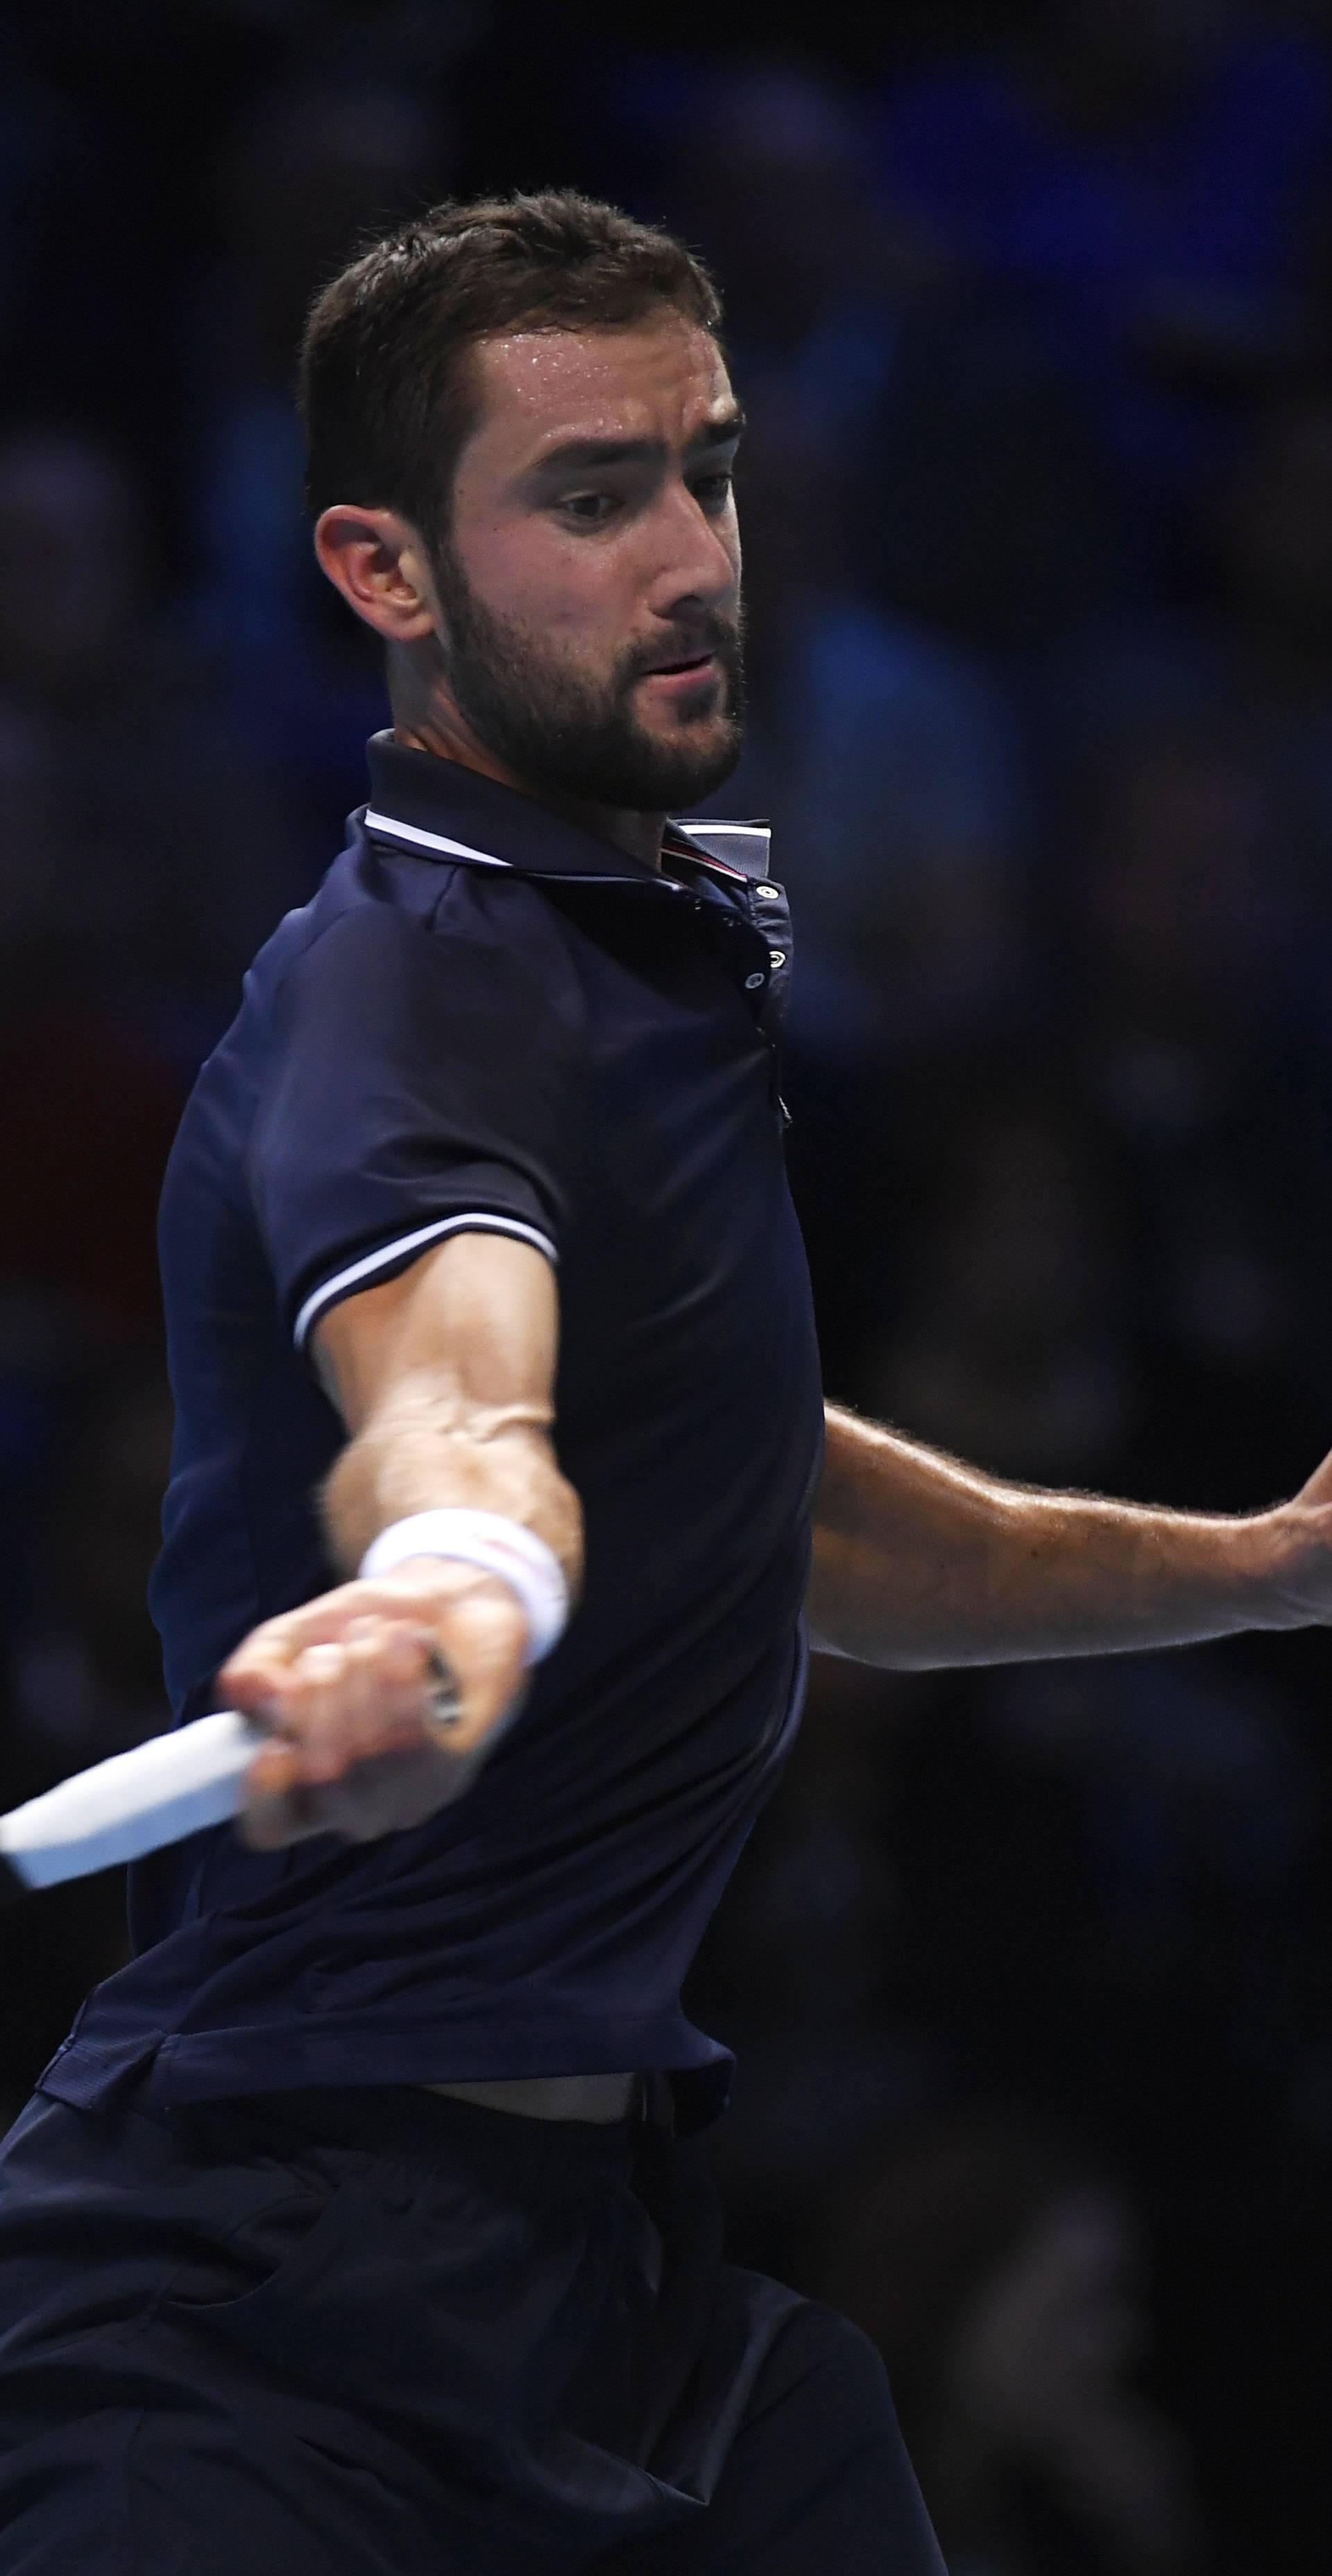 Croatia's Marin Cilic in action during his round robin match with Switzerland's Stanislas Wawrinka